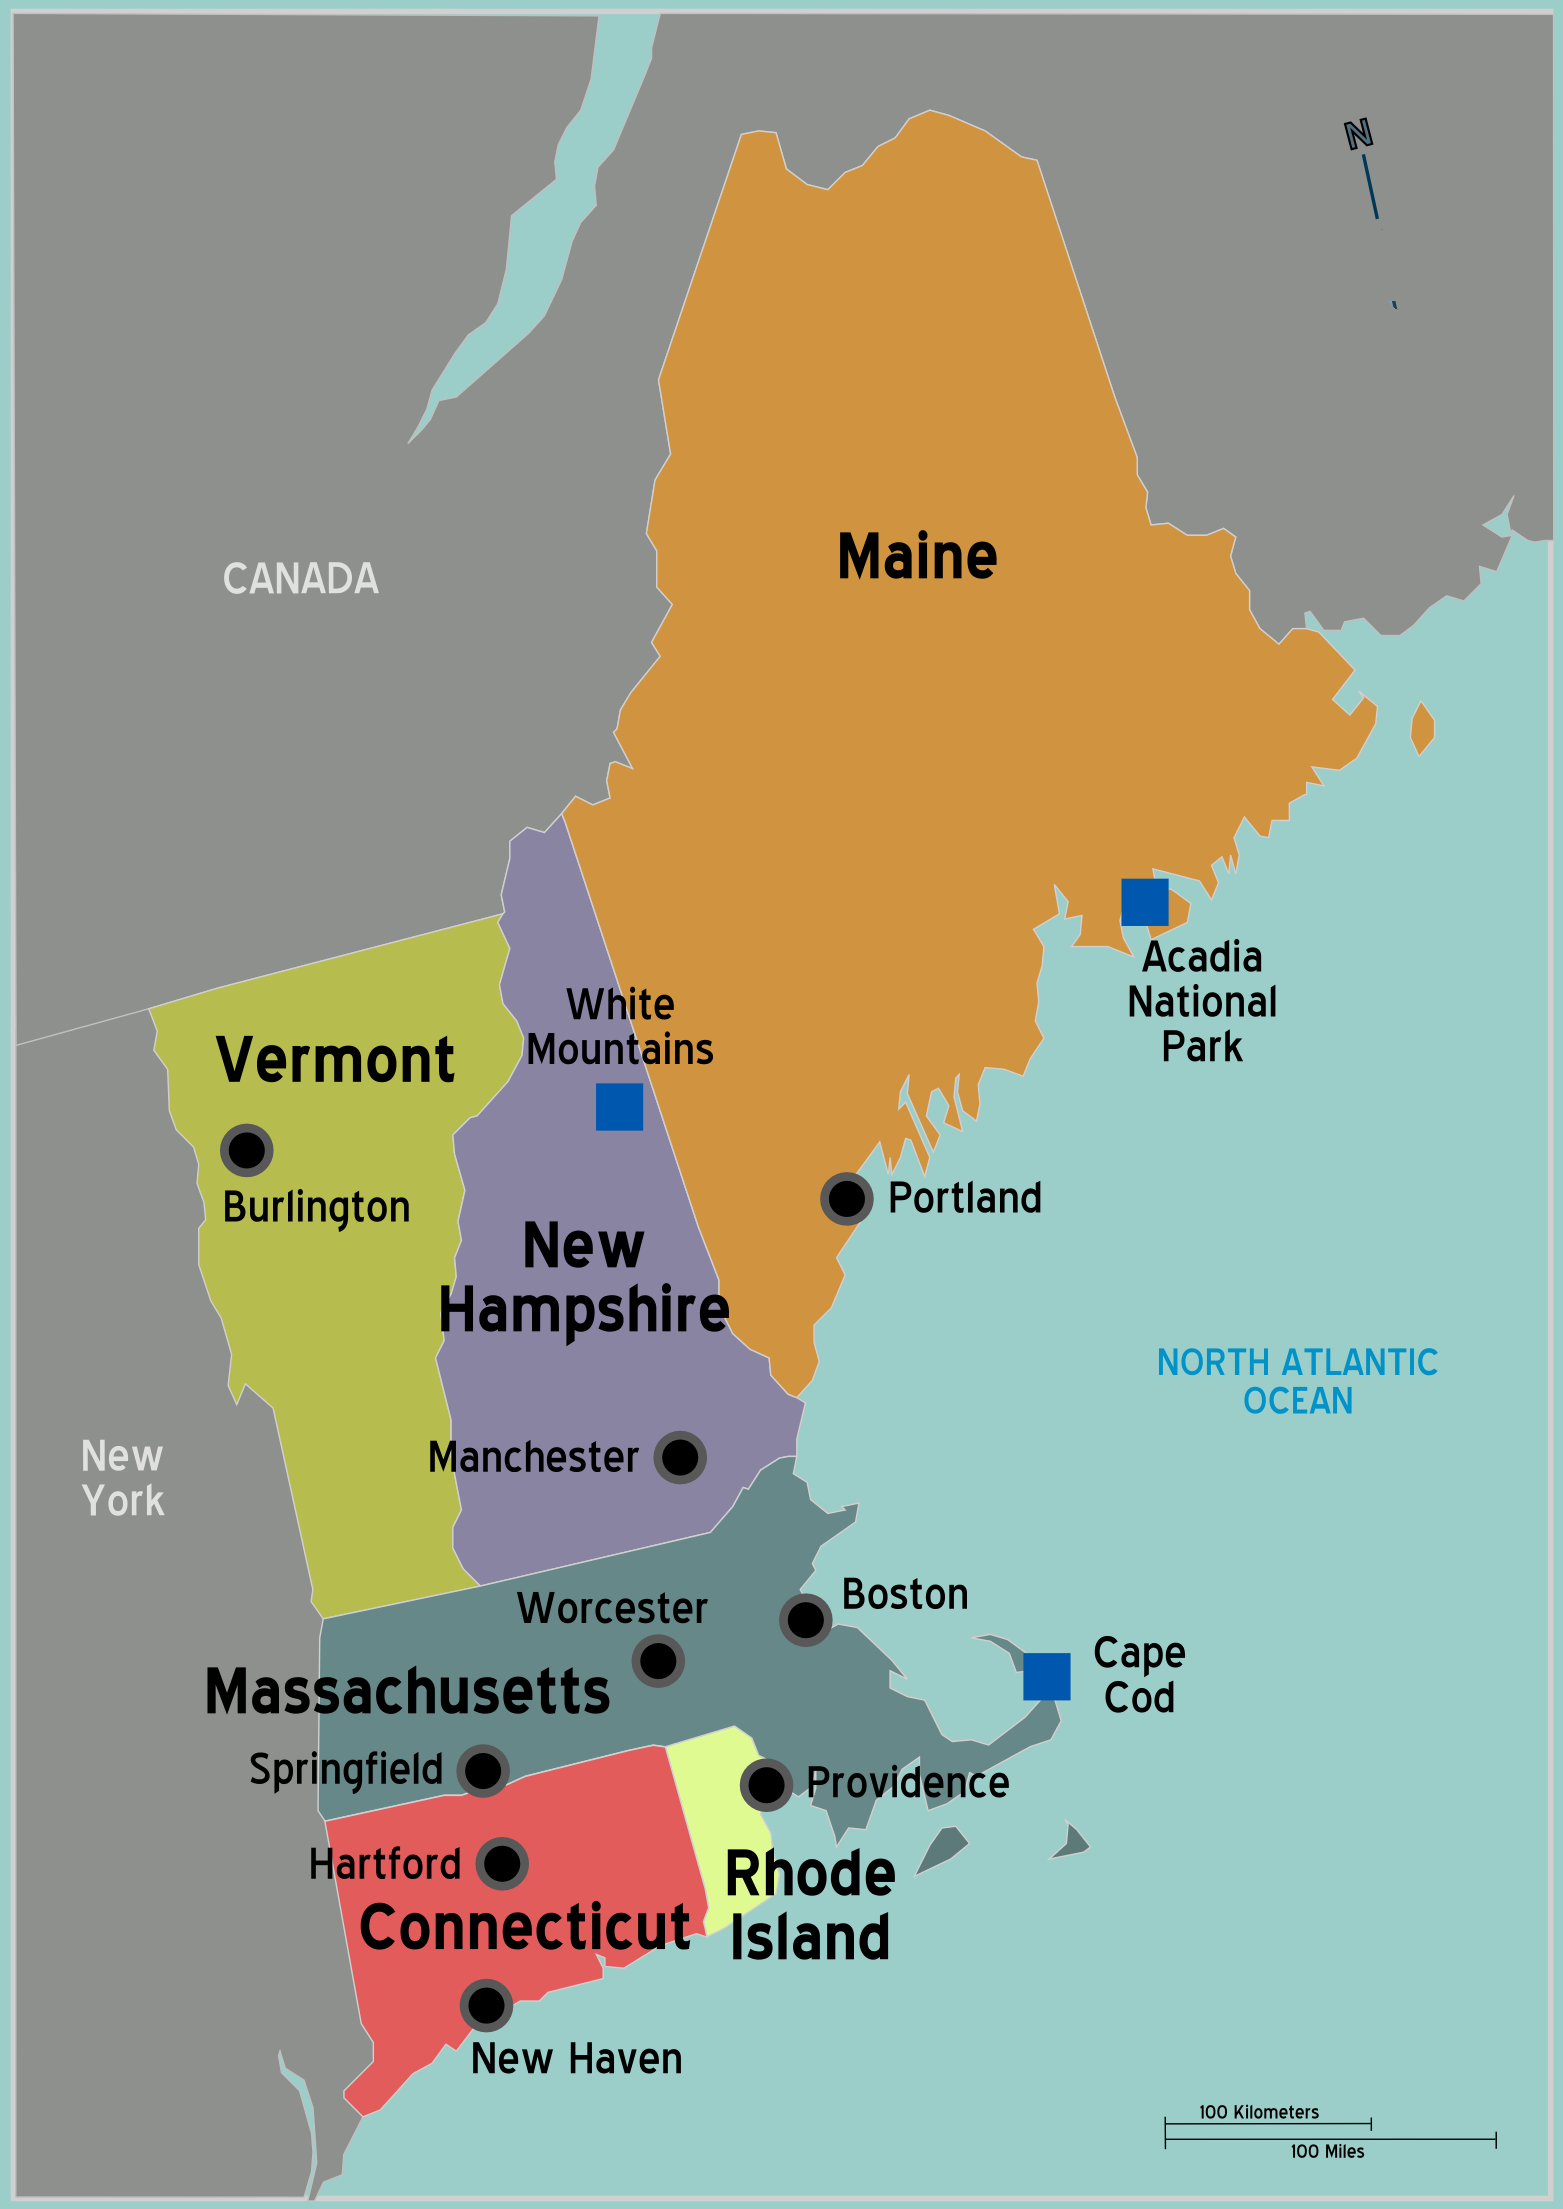 the six states that make up the new england cultural region